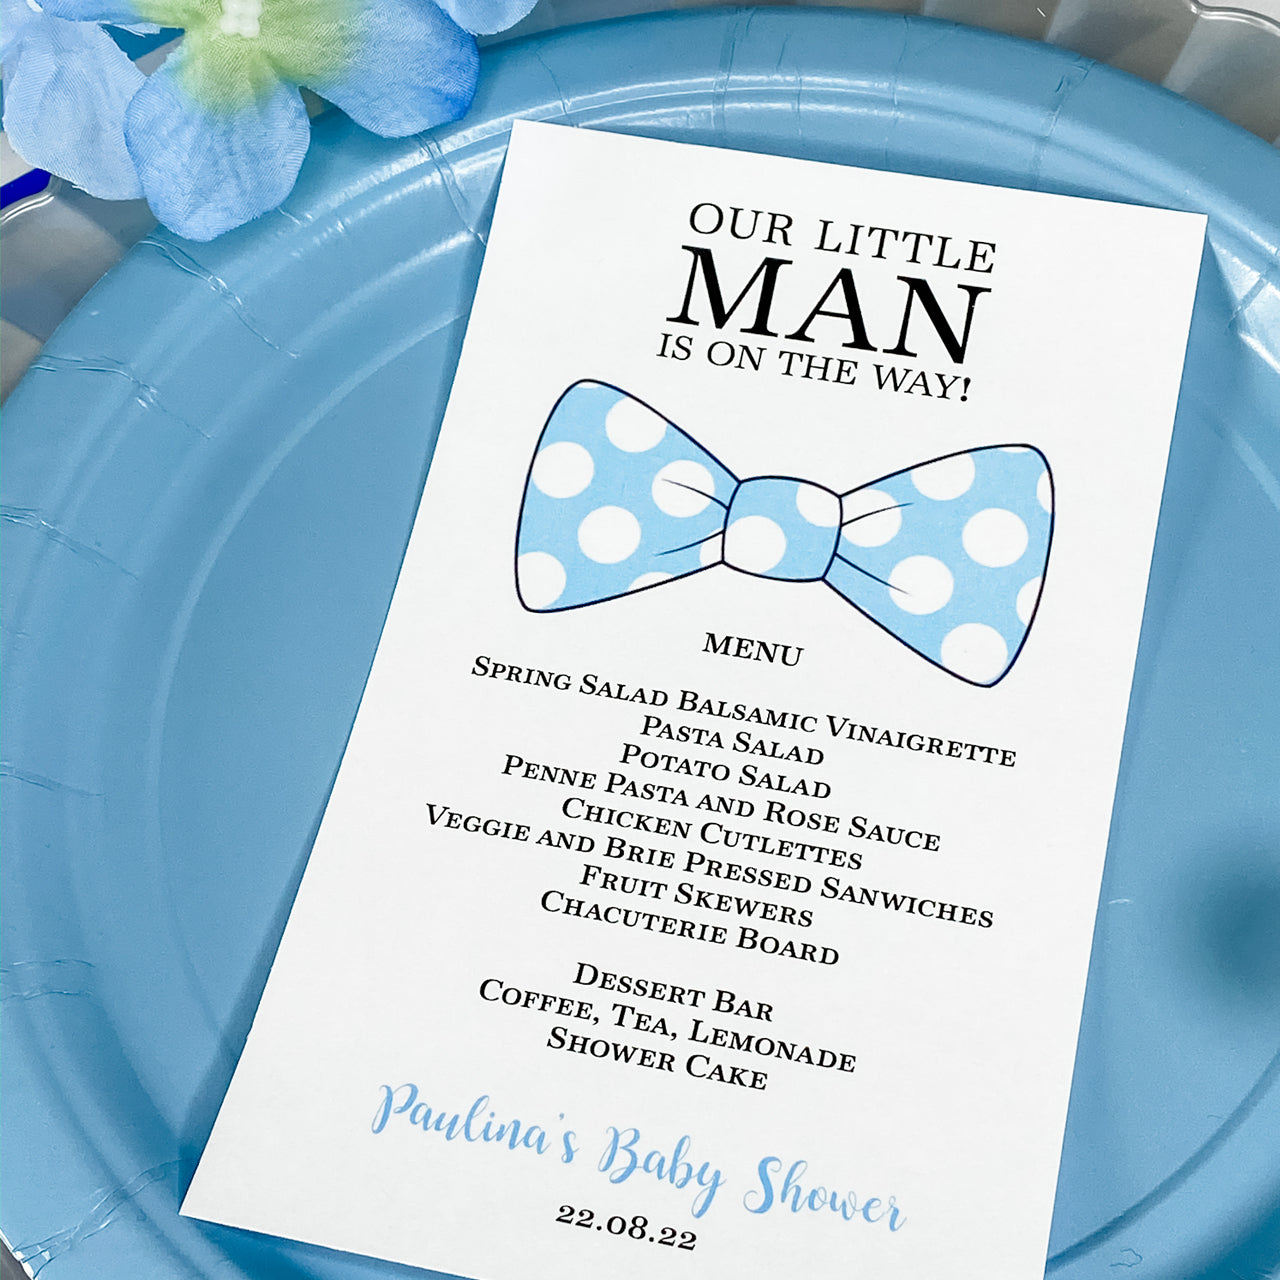 LITTLE MAN IS ON THE WAY BOWTIE MENU CARDS